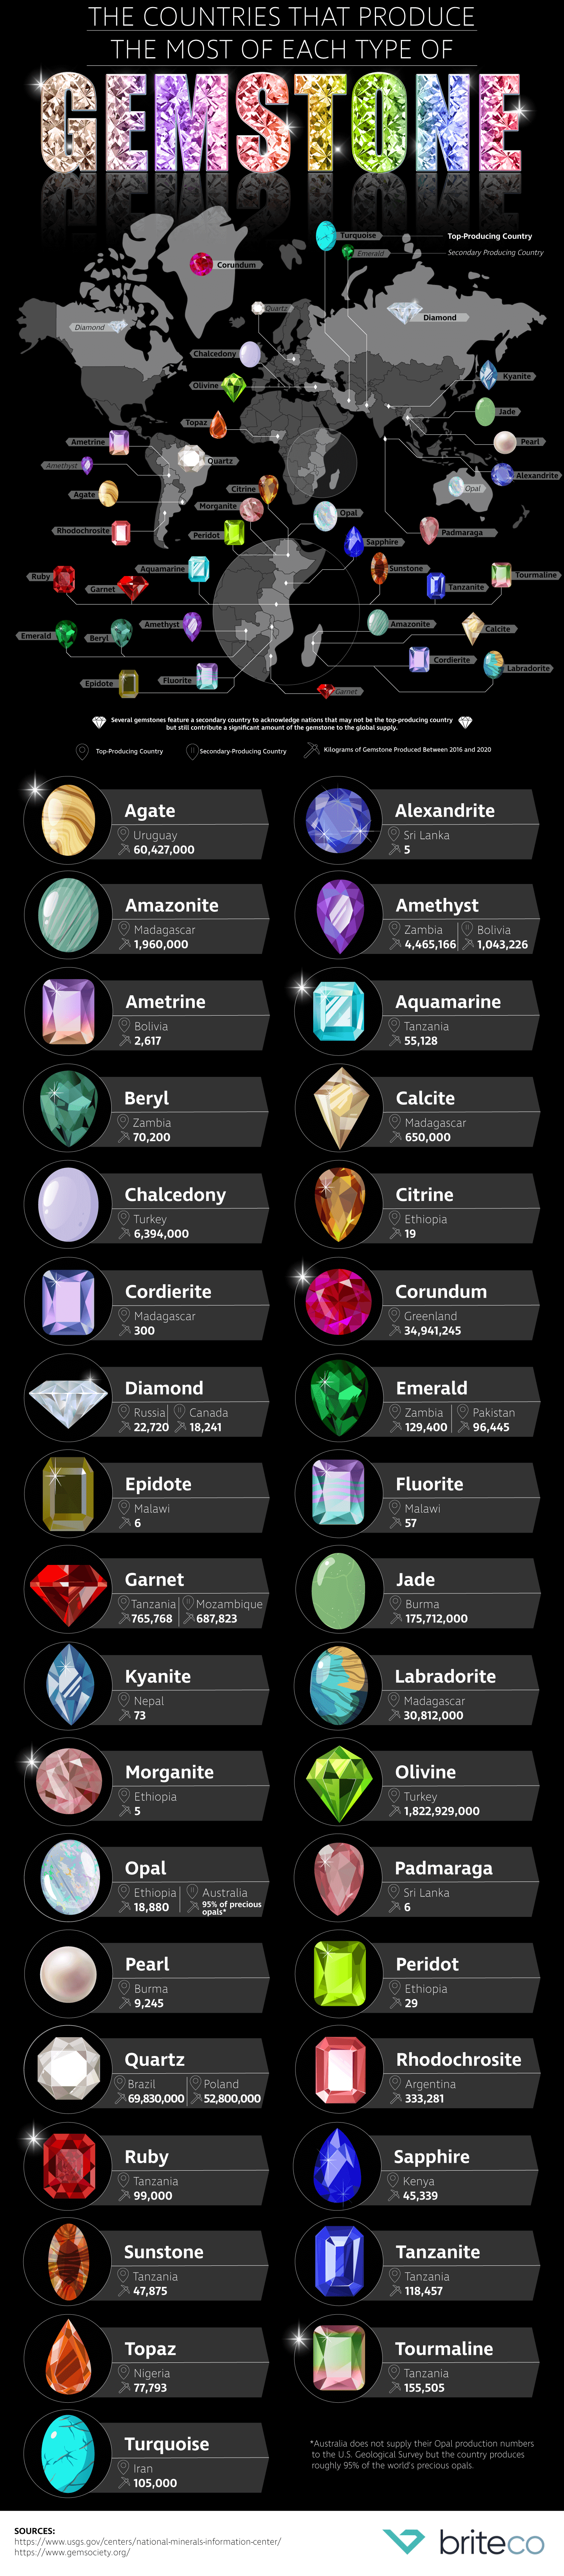 The Countries That Produce the Most of Each Type of Gemstone